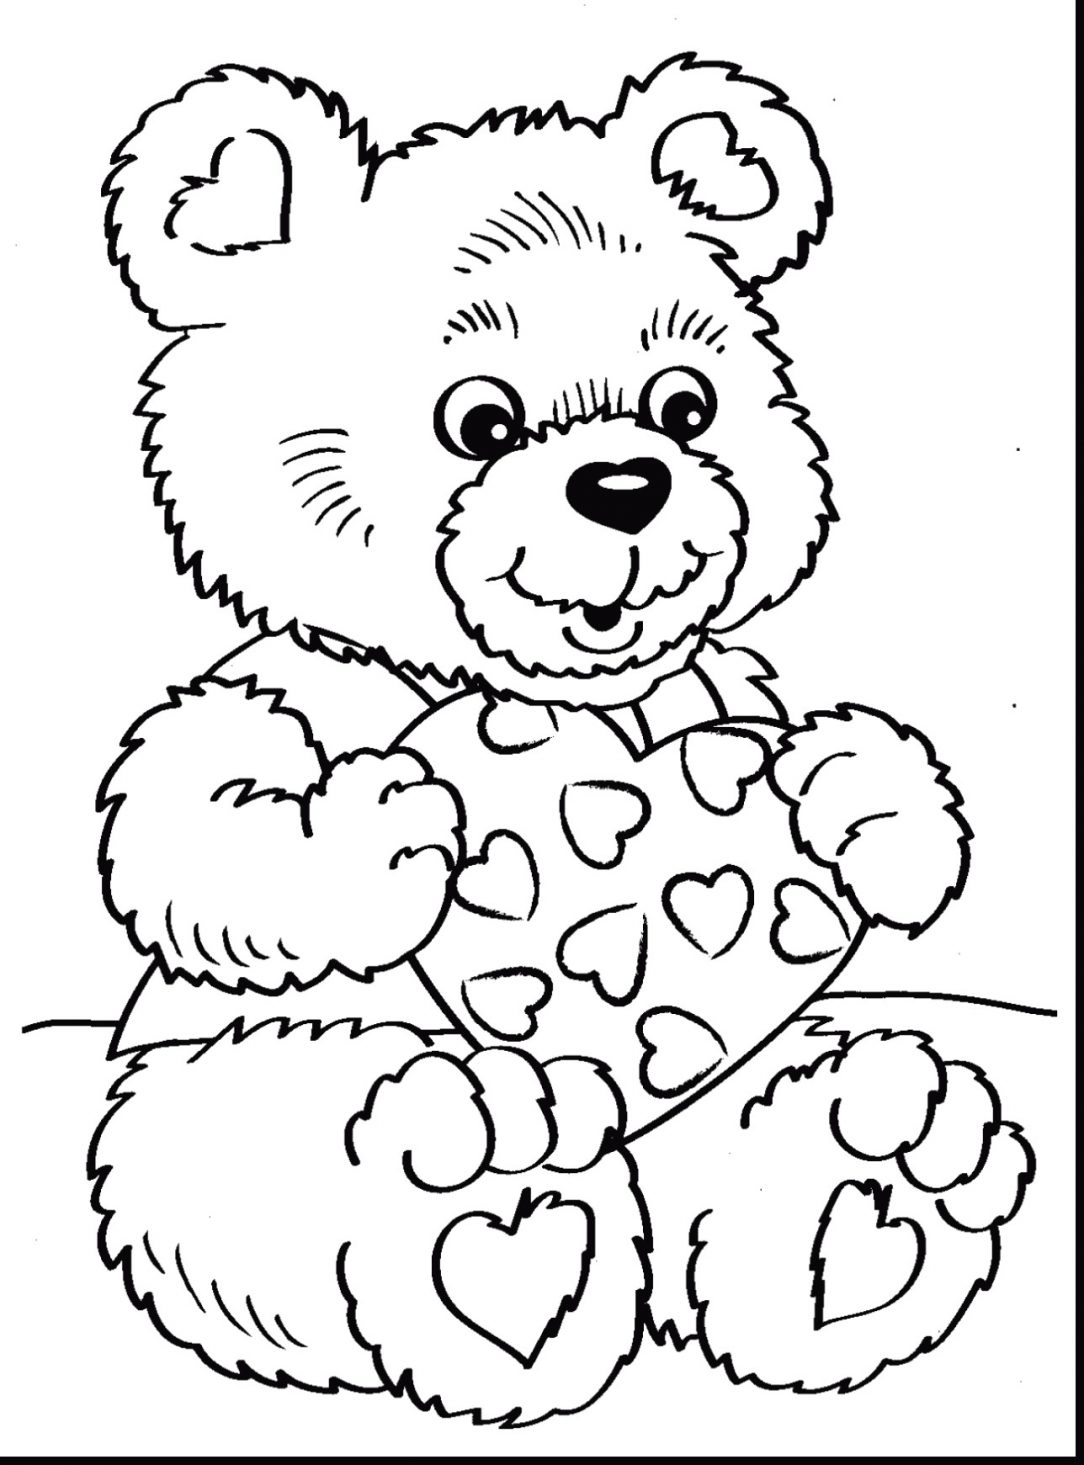 Valentine Teddy Bear Coloring Pages Valentines Coloring Pages Paw Patrol Photo Album Sabadaphnecottage